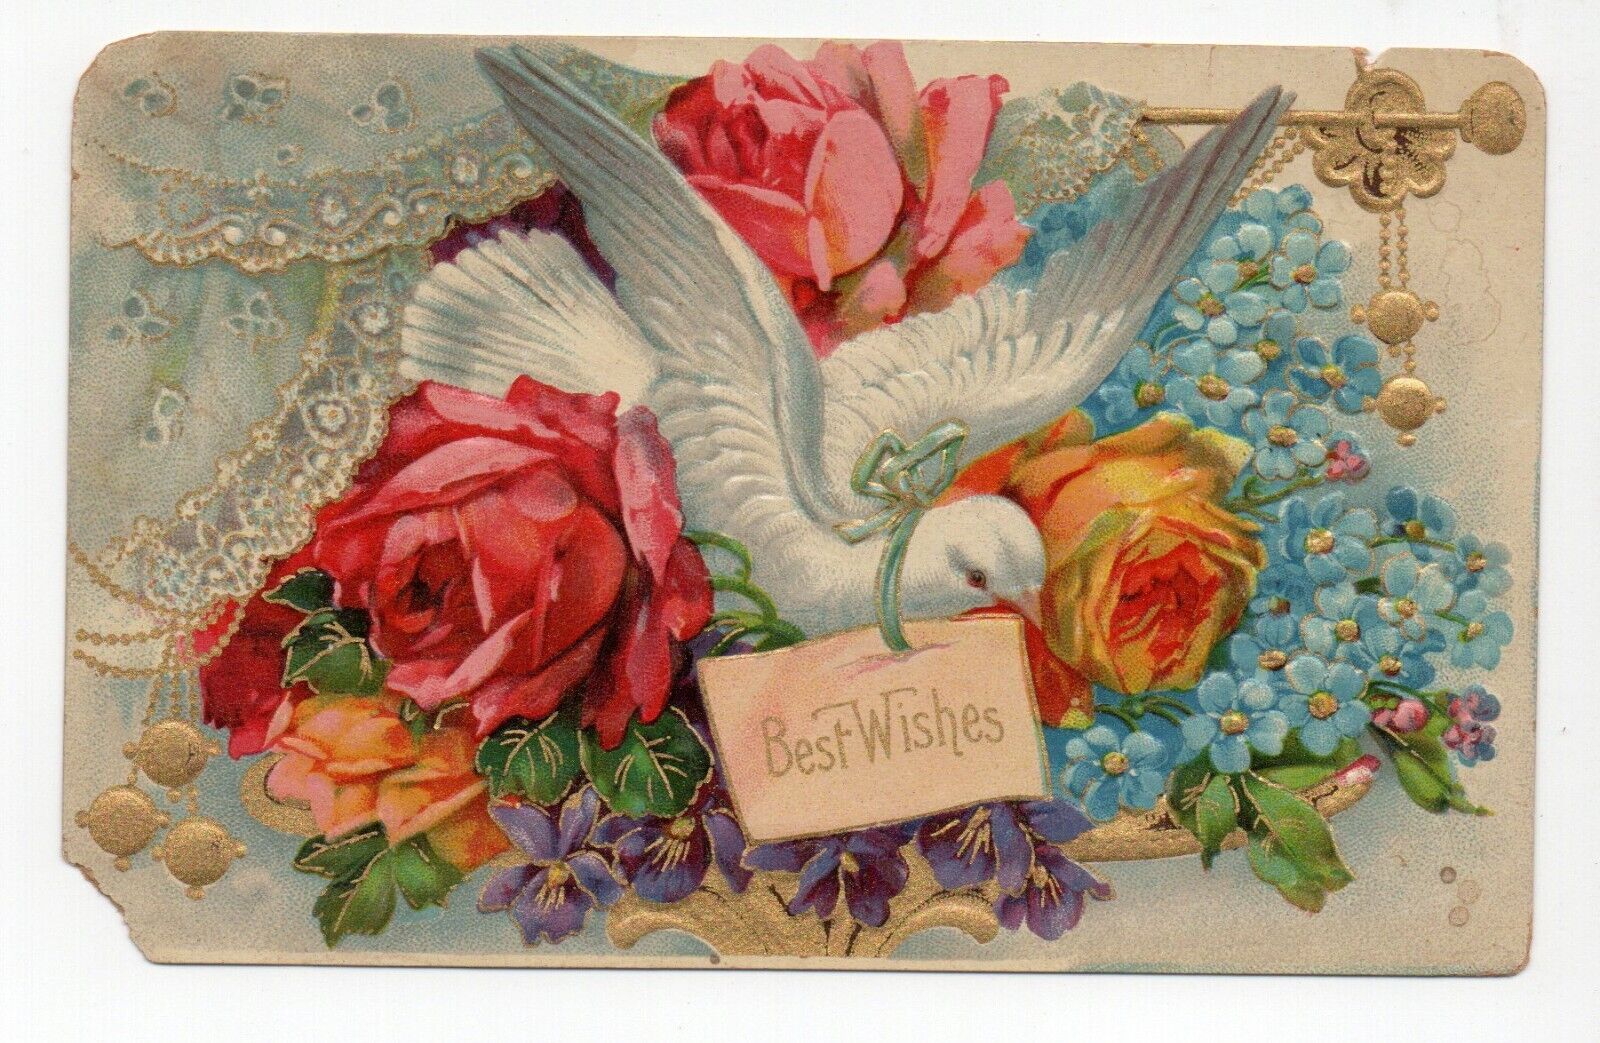 Beautiful Roses Blue Flowers Dove Lace Best Wishes Embossed Vintage Postcard